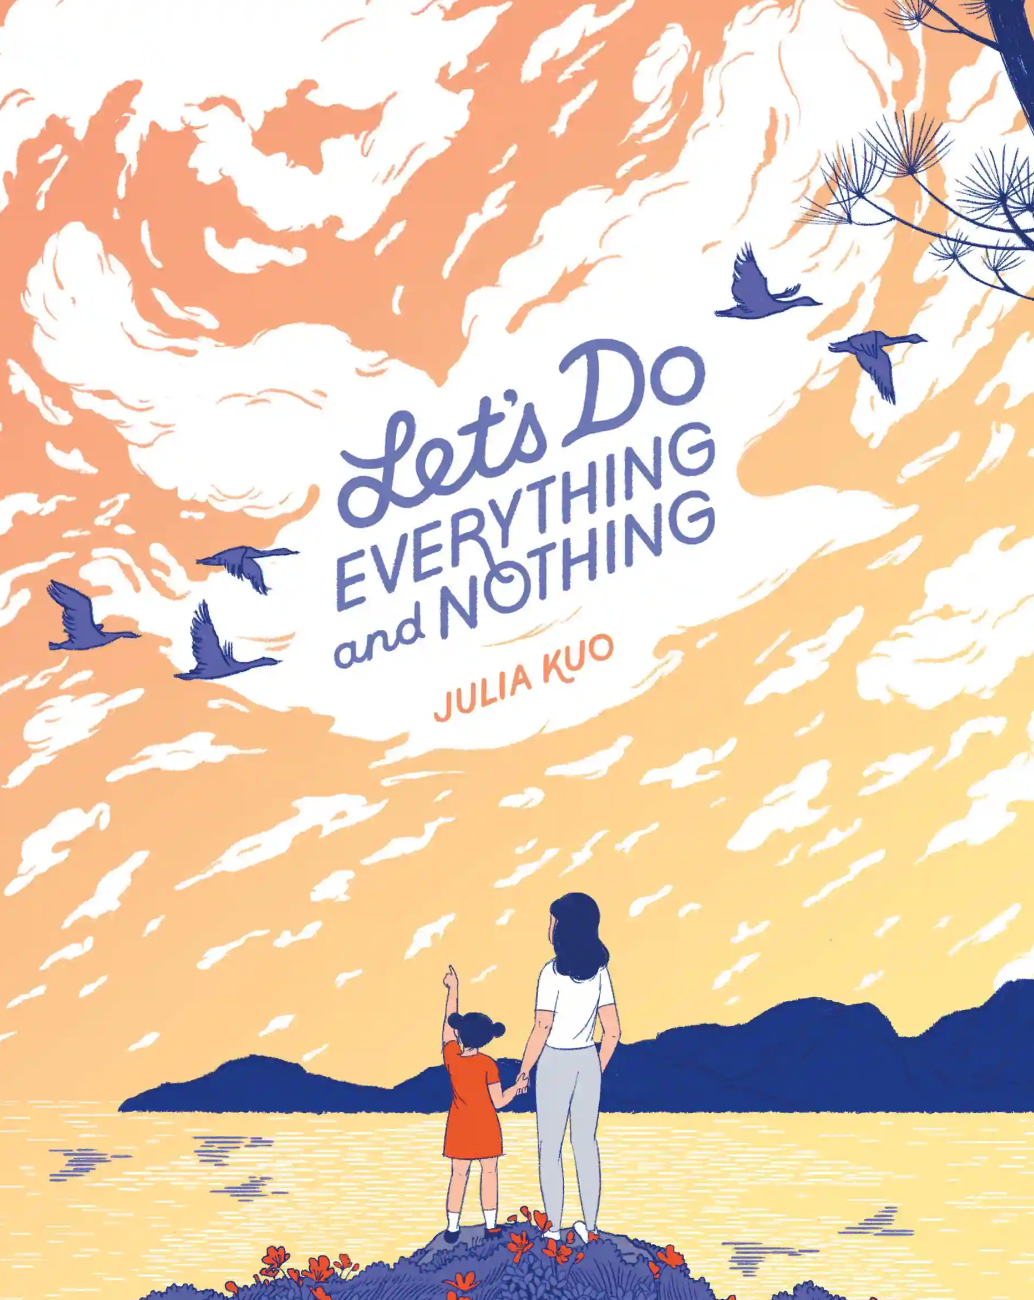 Let's Do Everything and Nothing